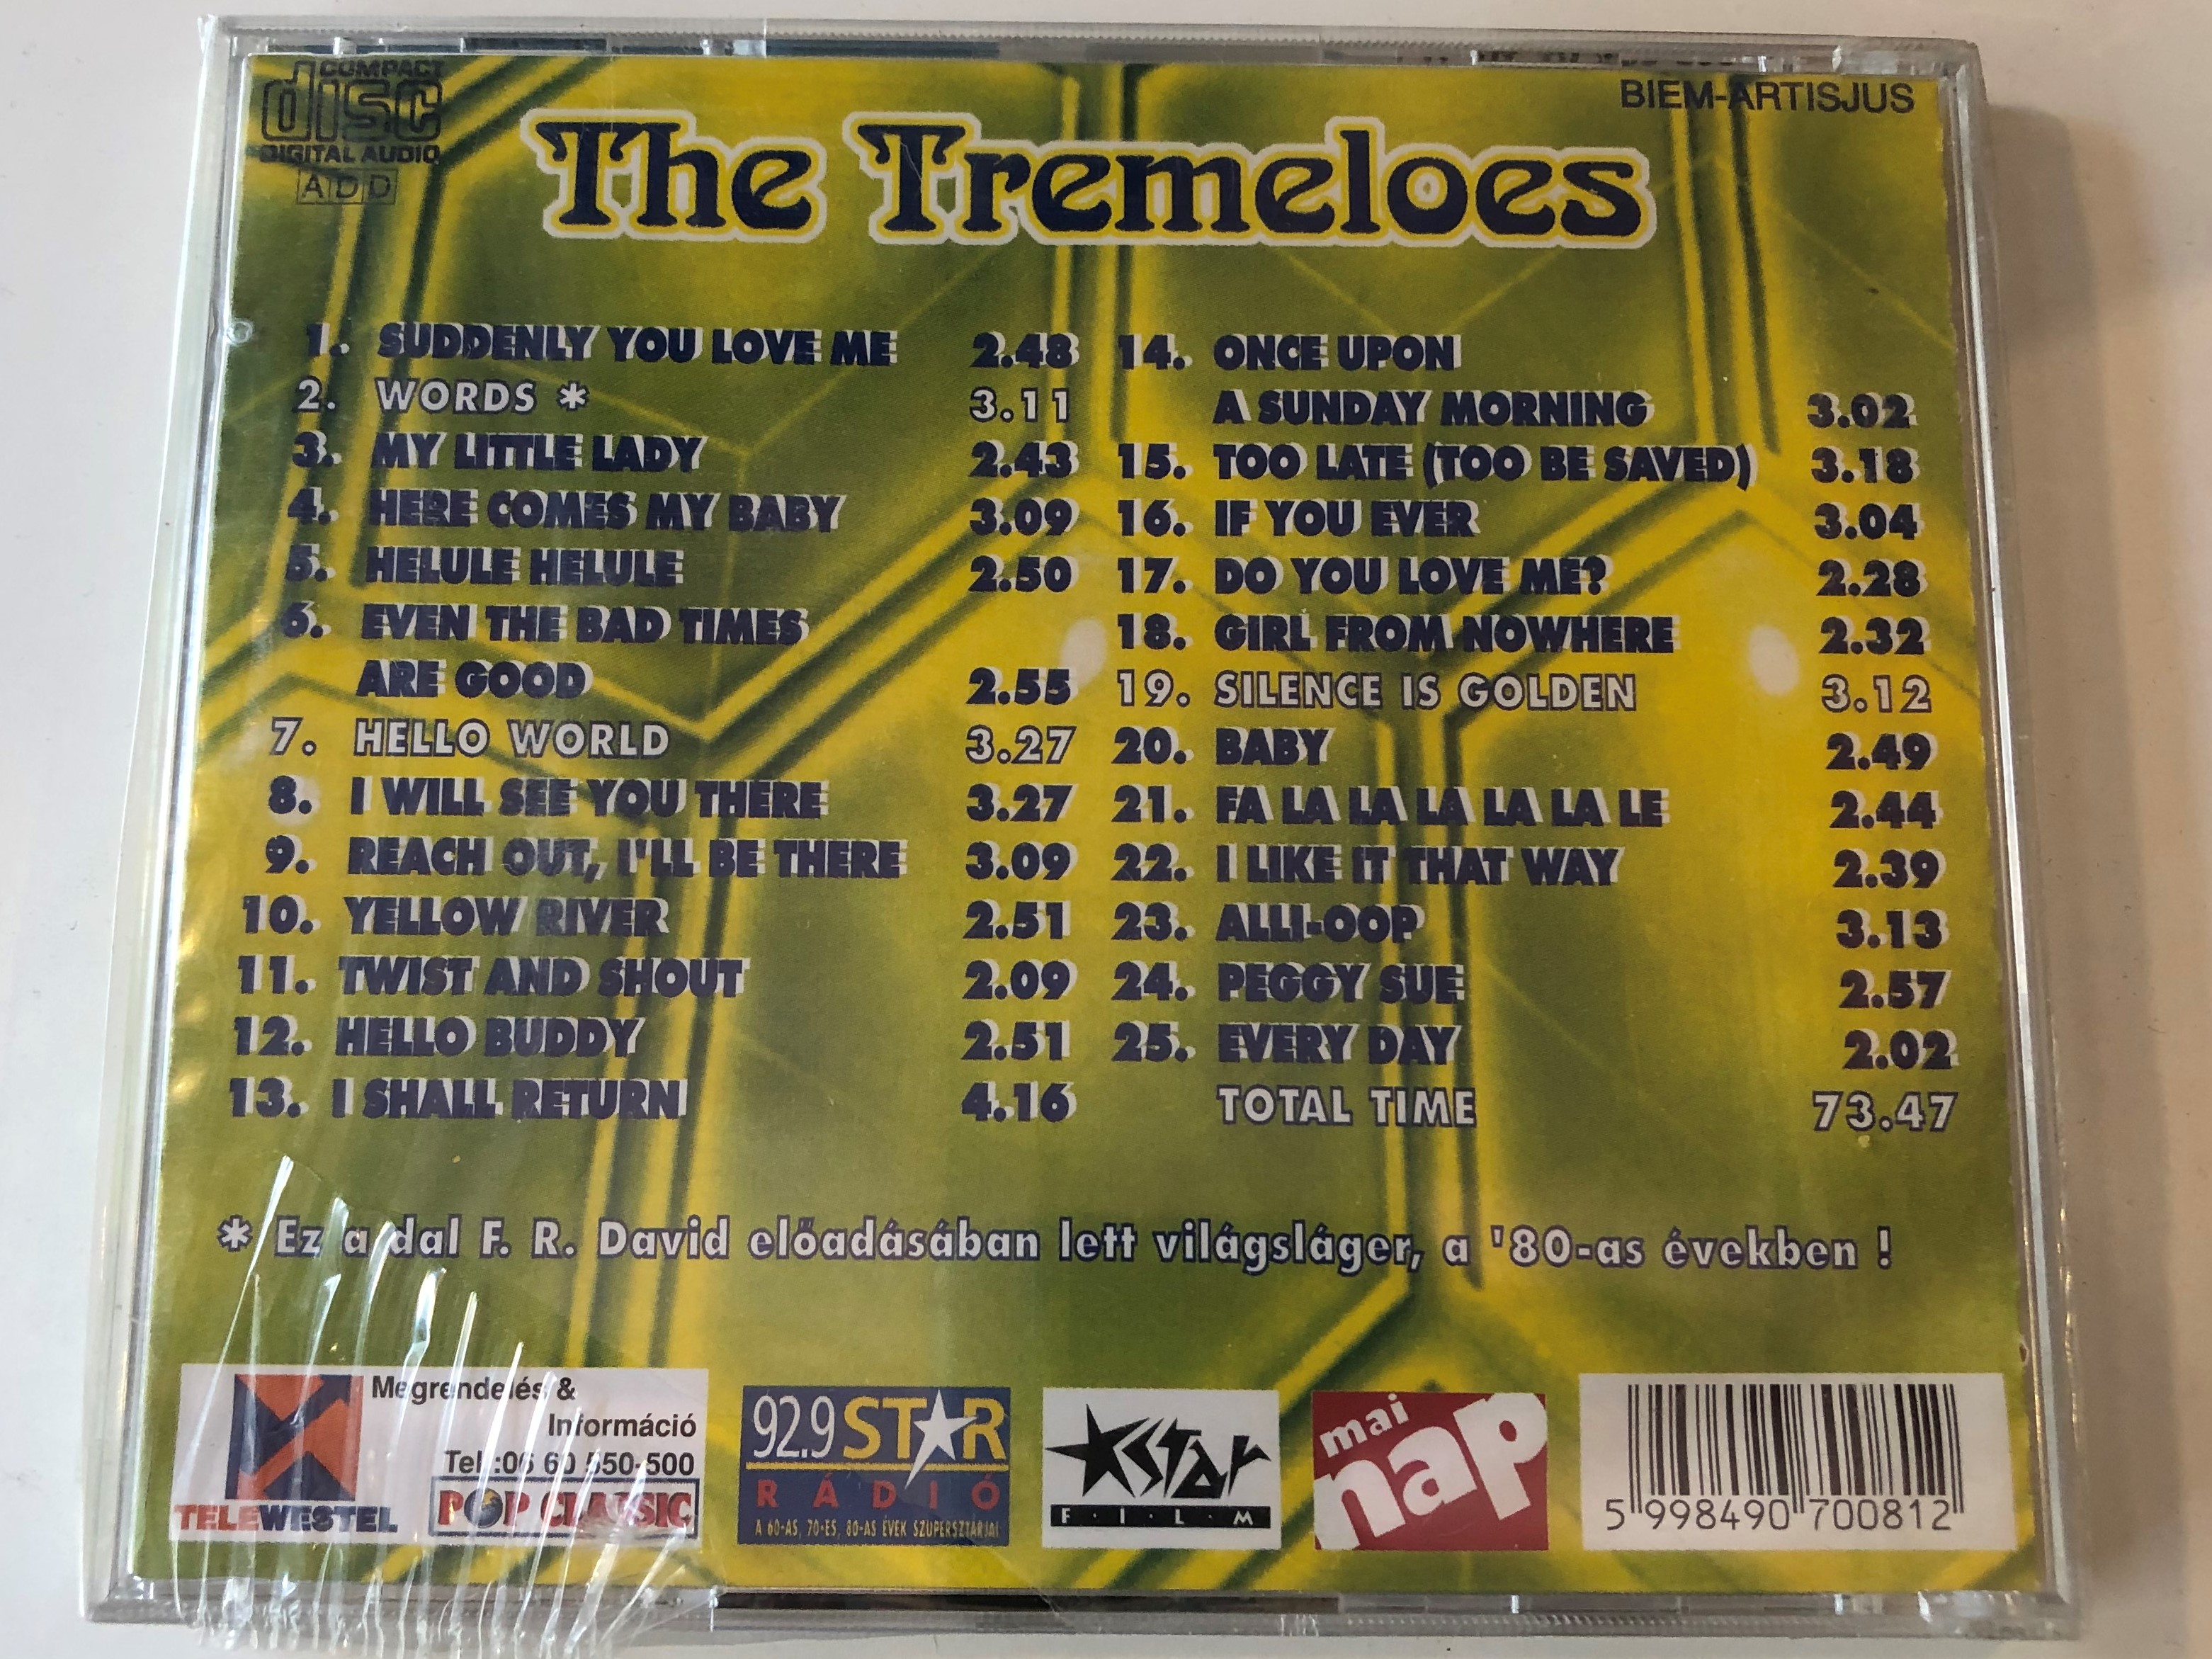 the-tremeloes-best-of-total-time-73.47-pop-classic-euroton-audio-cd-5998490700812-2-.jpg